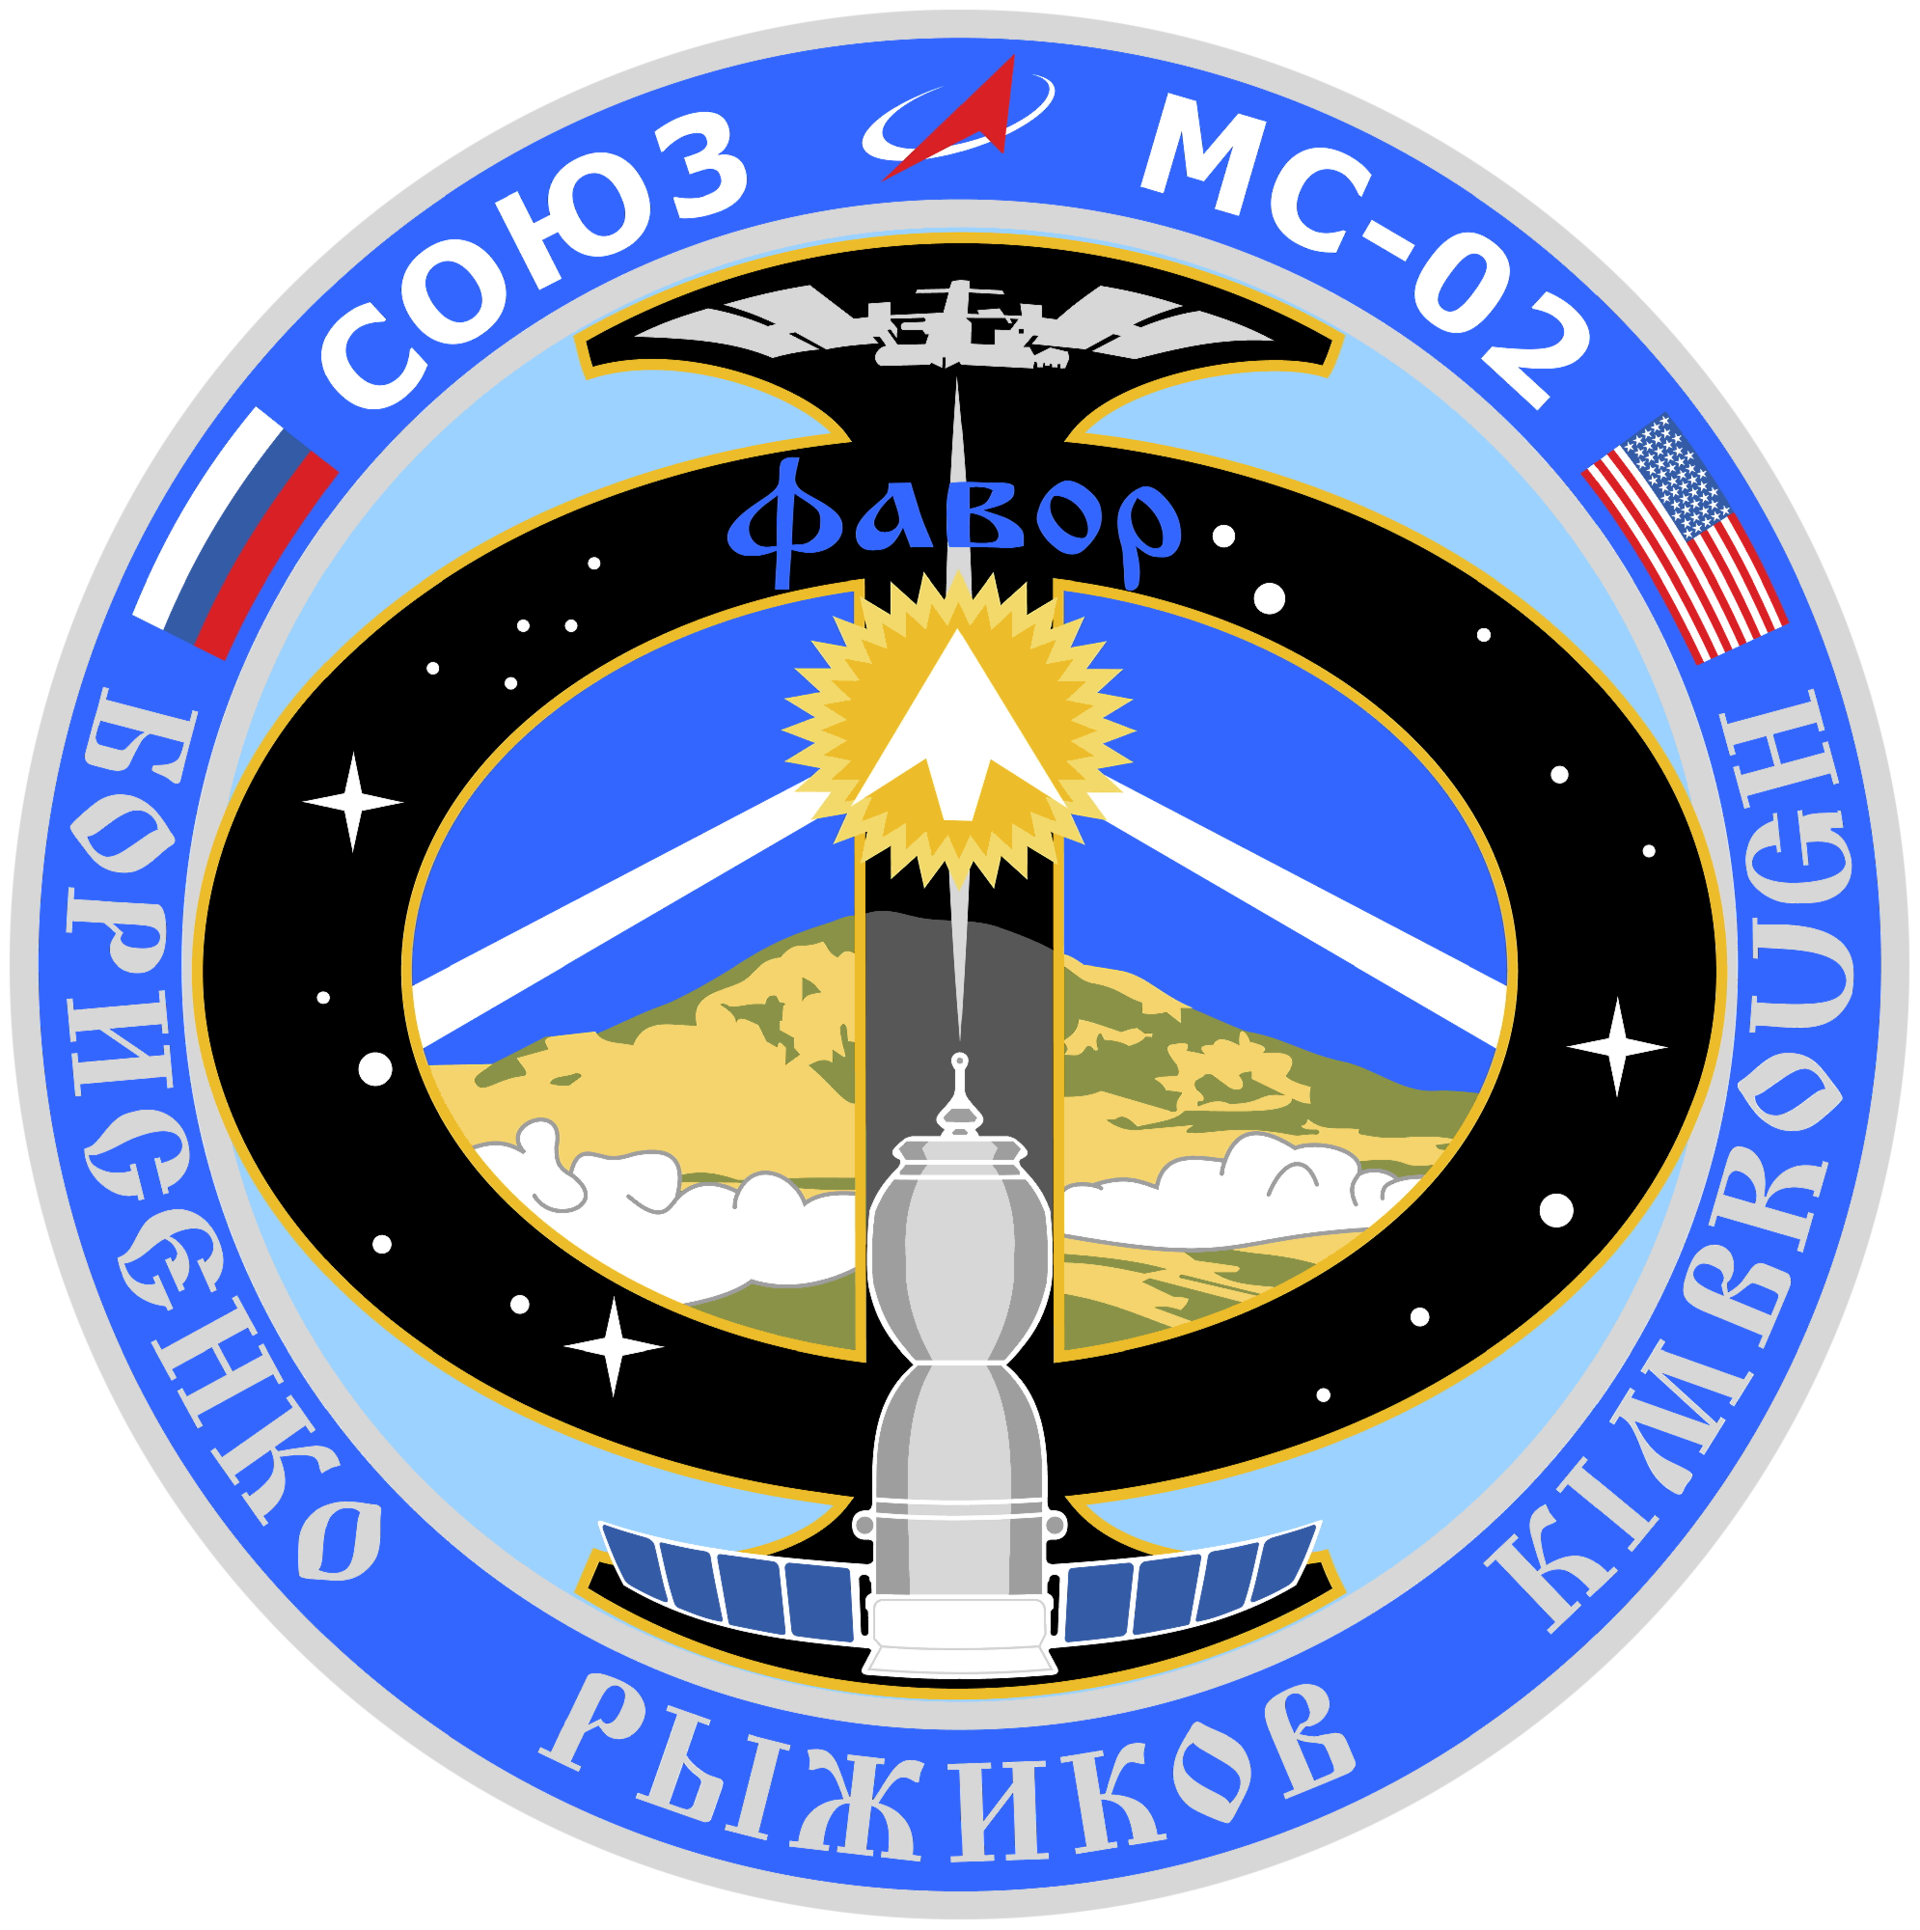 Mission patch for Soyuz MS-02